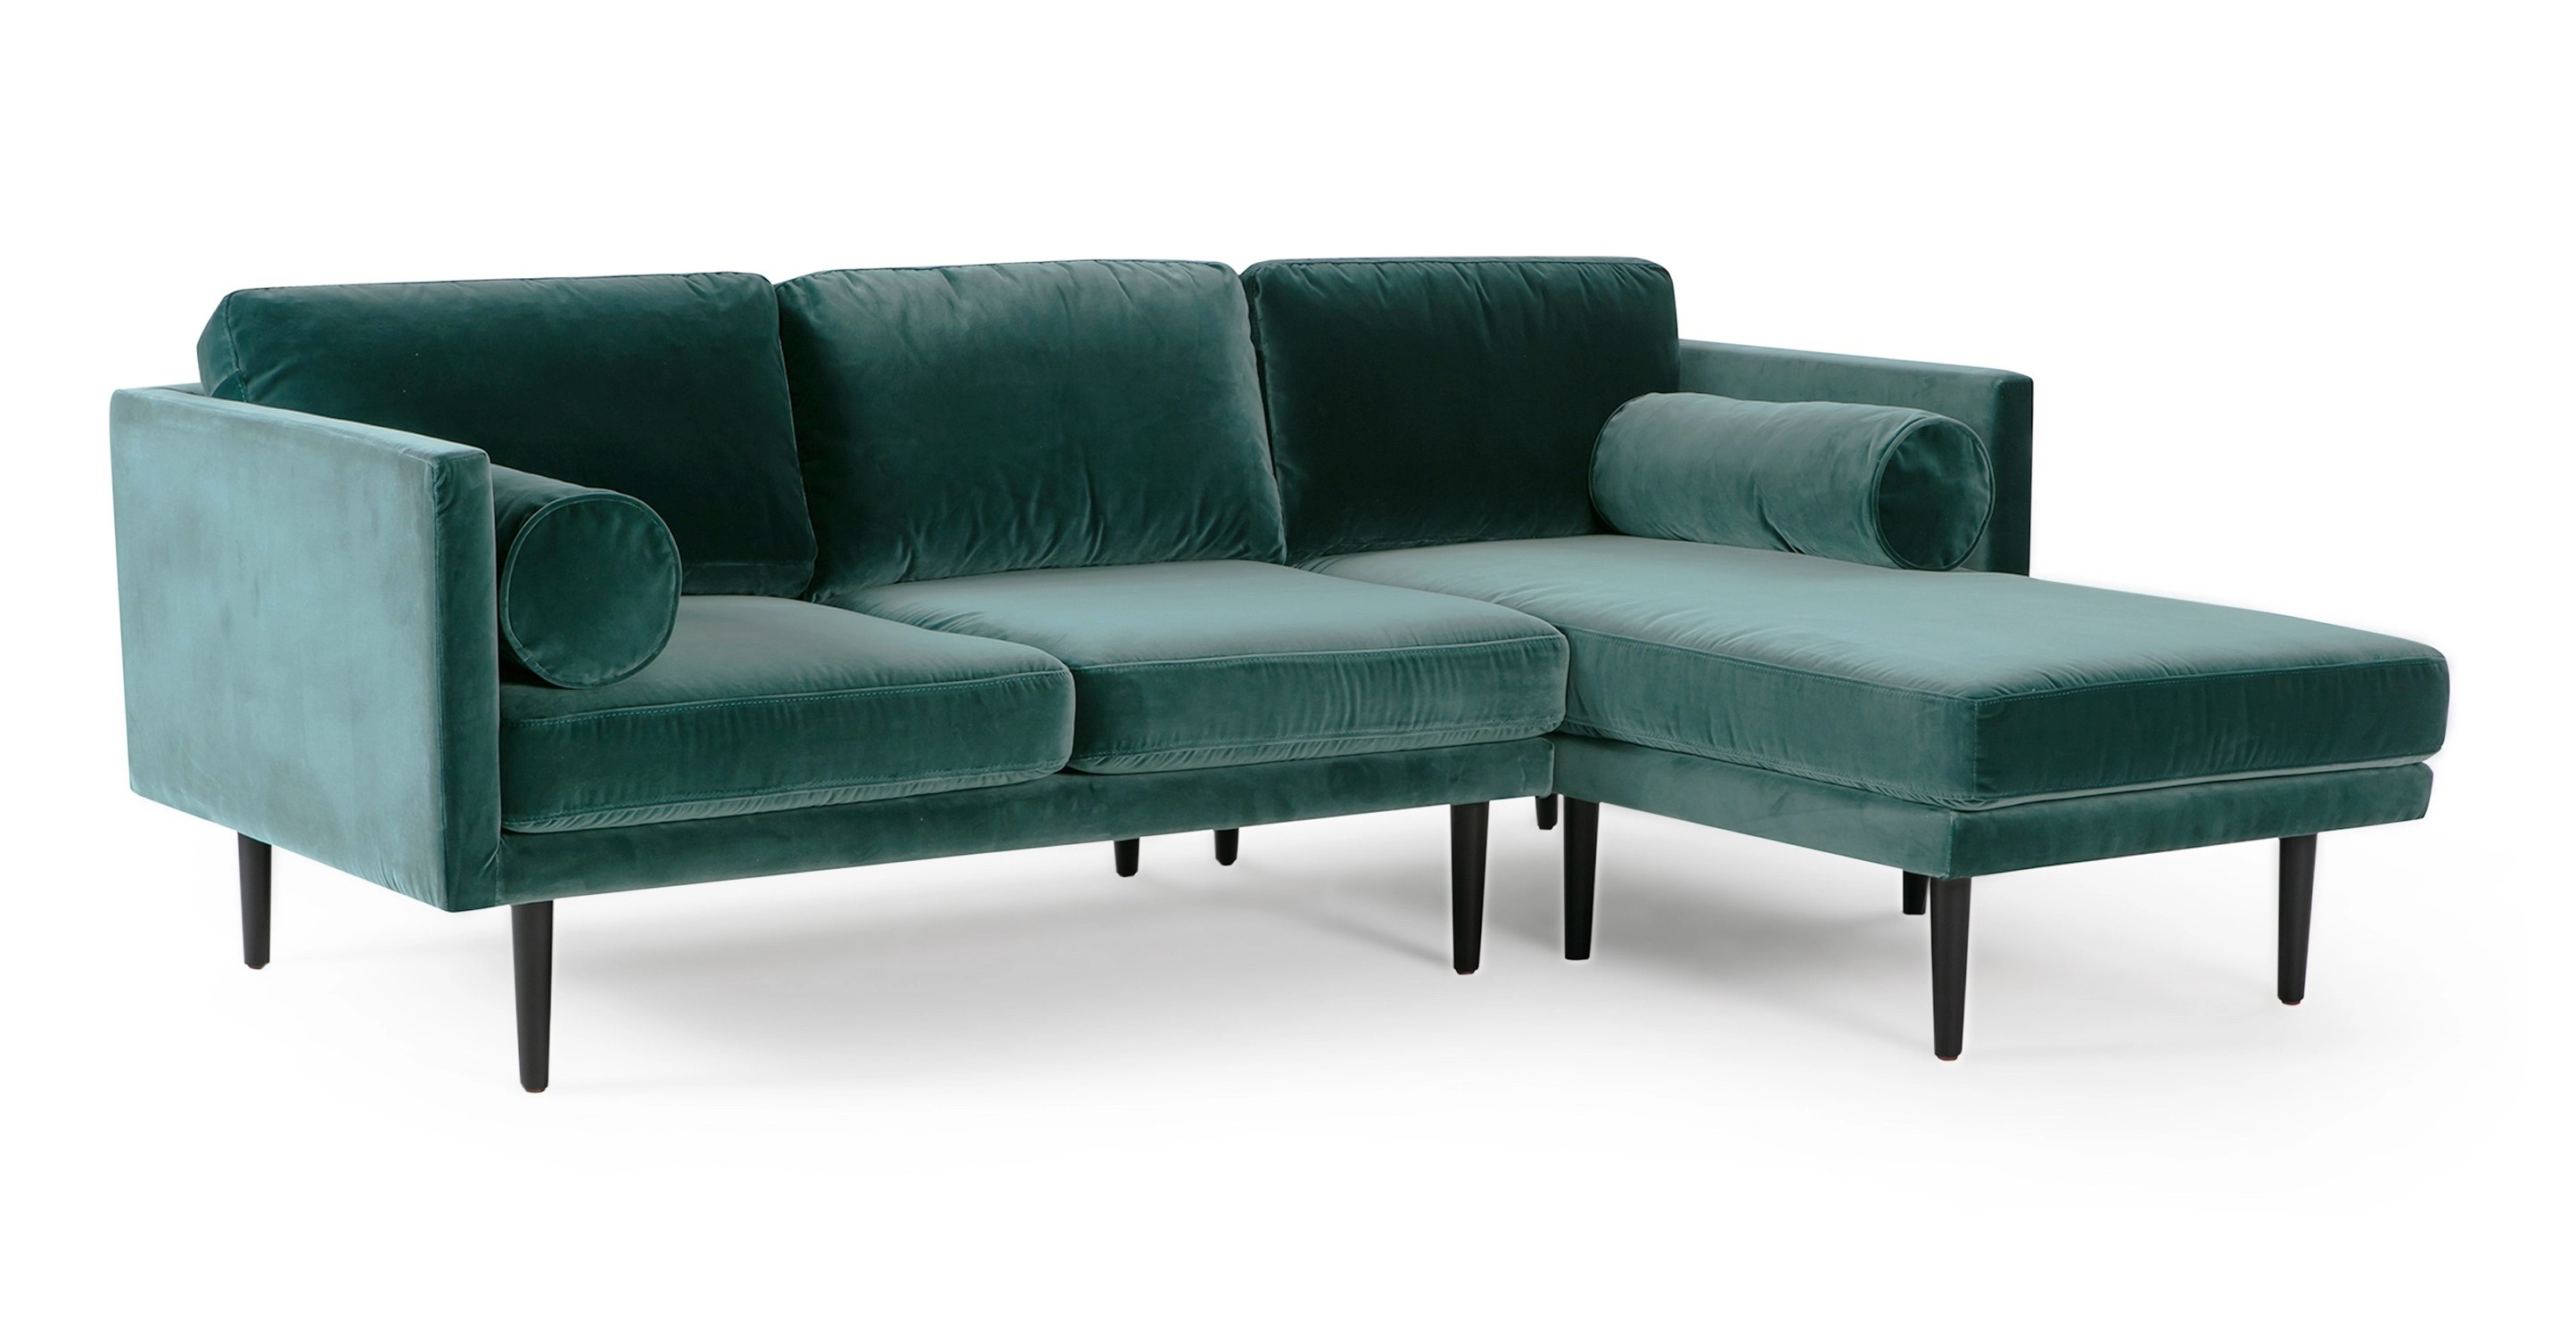 The Spectre Tranquil blue velvet Sectional is a timeless contemporary sofa that is 100% upholstered. It features a cohesive design with both the base frame and arms sharing the same thickness, resulting in a harmonious and consistent look. The sofa's portion has two seat and back cushions are removable and strike a balance between being well-cushioned and not overly stuffed. The chaise portion has one large seat cushion and one back cushion. To further enhance comfort, the Spectre includes two bolster pillows positioned on either side of the arm. The sofa is raised by tapered wooden legs.